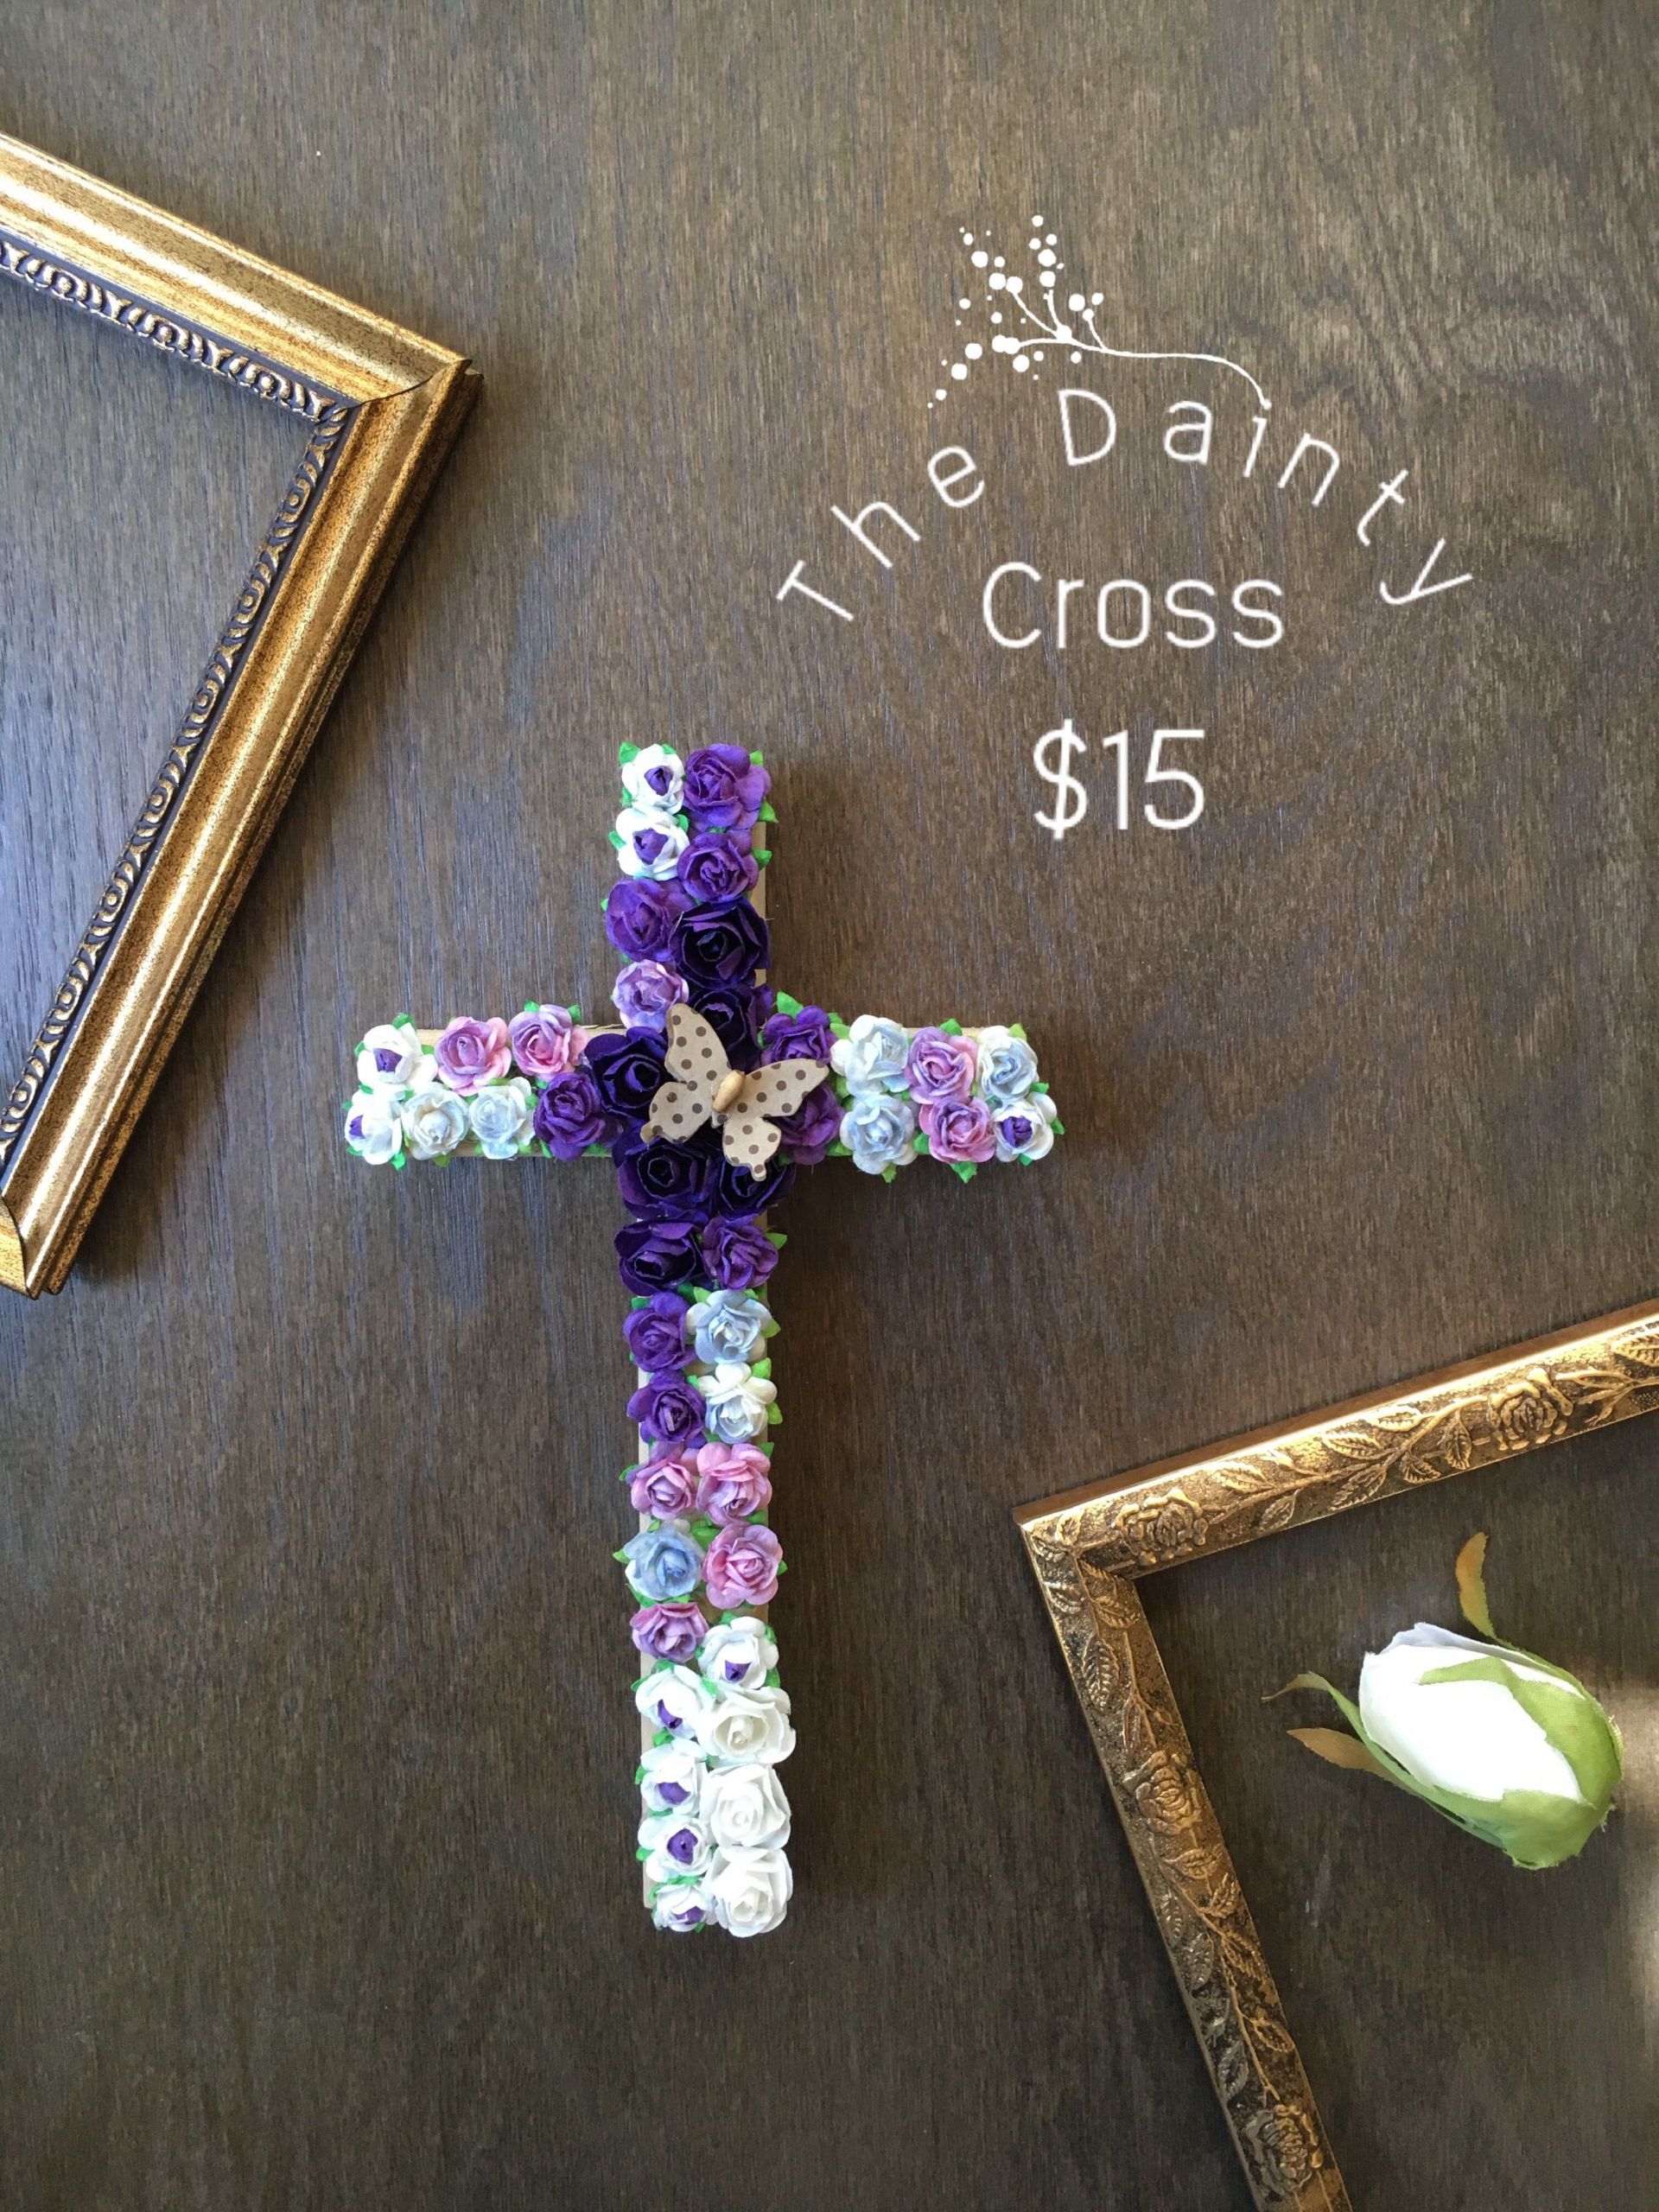 First Communion Gift Ideas Girls
 Pin on First holy munion ideas